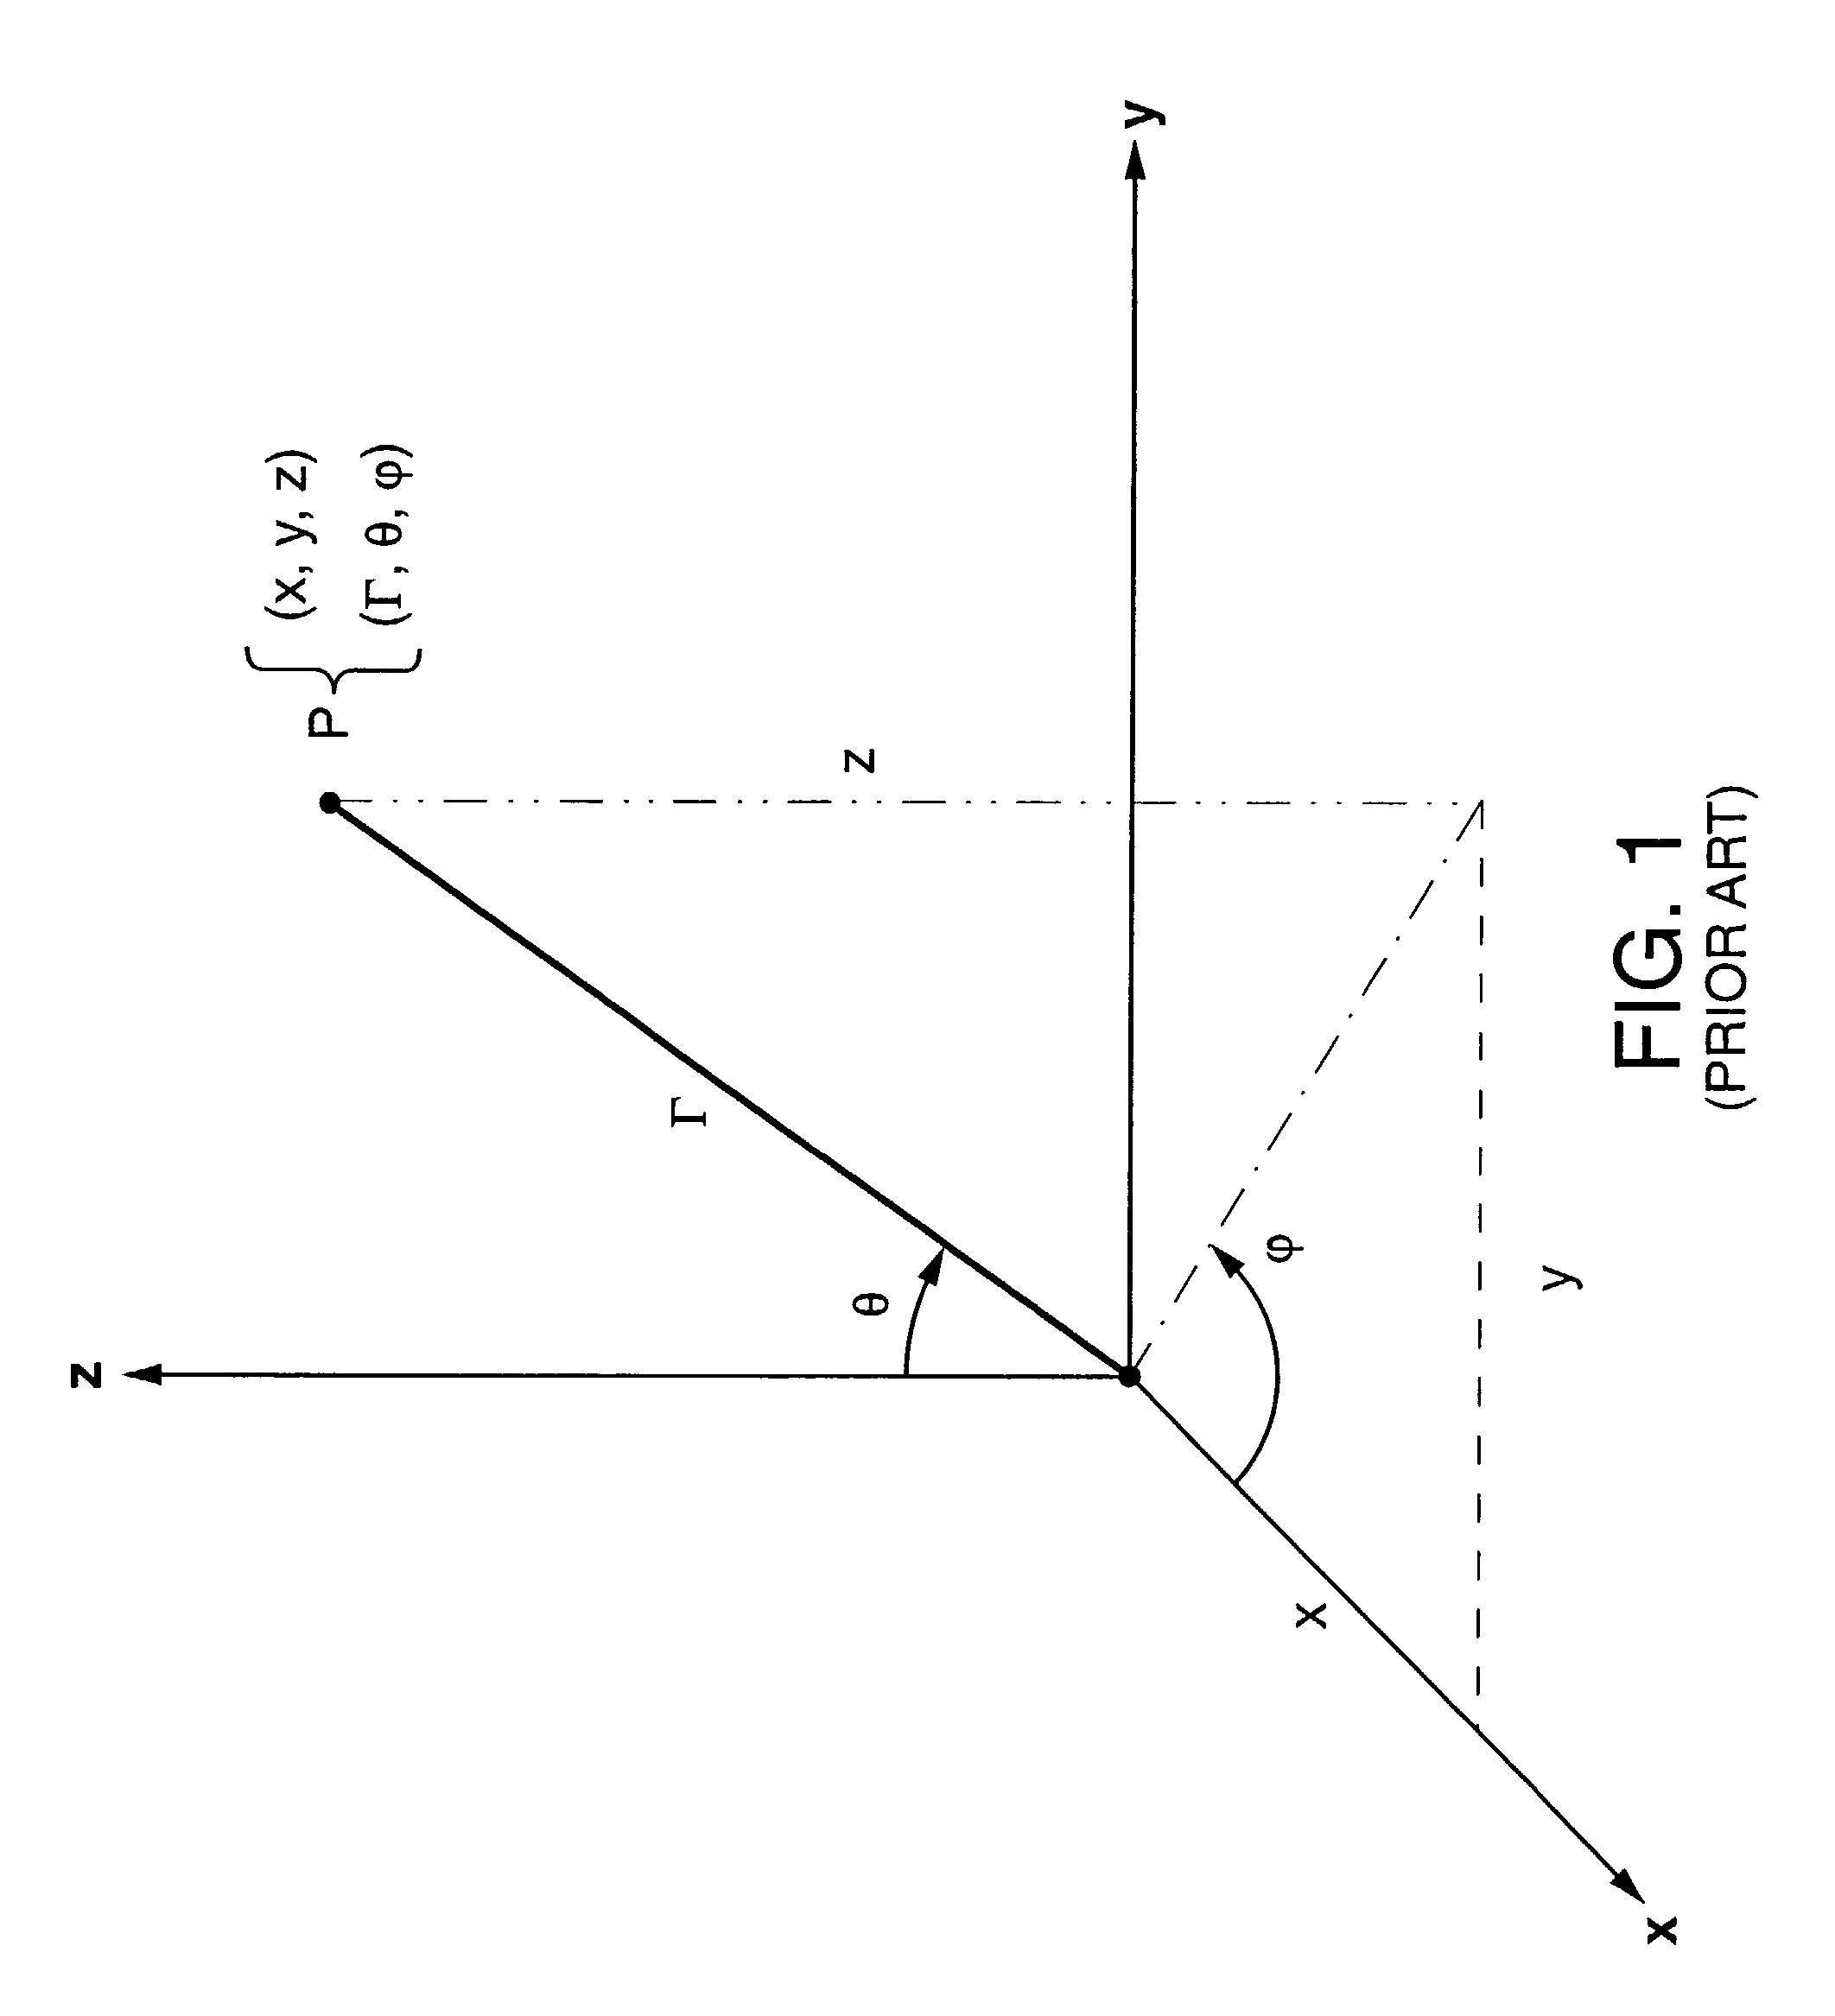 Method and system for navigating a catheter probe in the presence of field-influencing objects